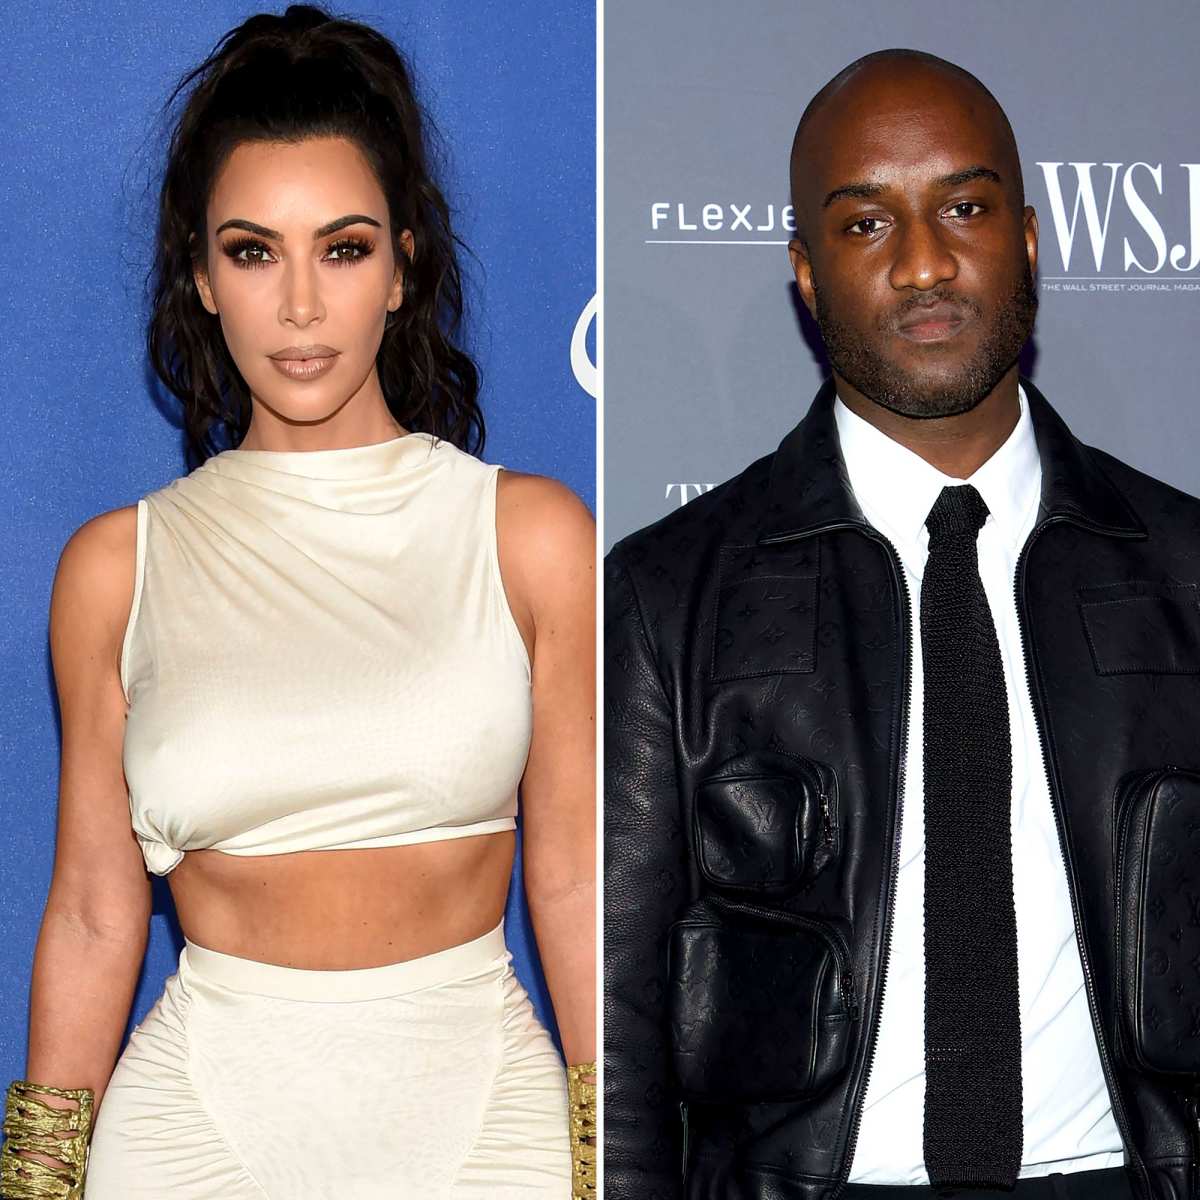 Gone Too Soon: Celebrities React To The Passing Of Designer Virgil Abloh